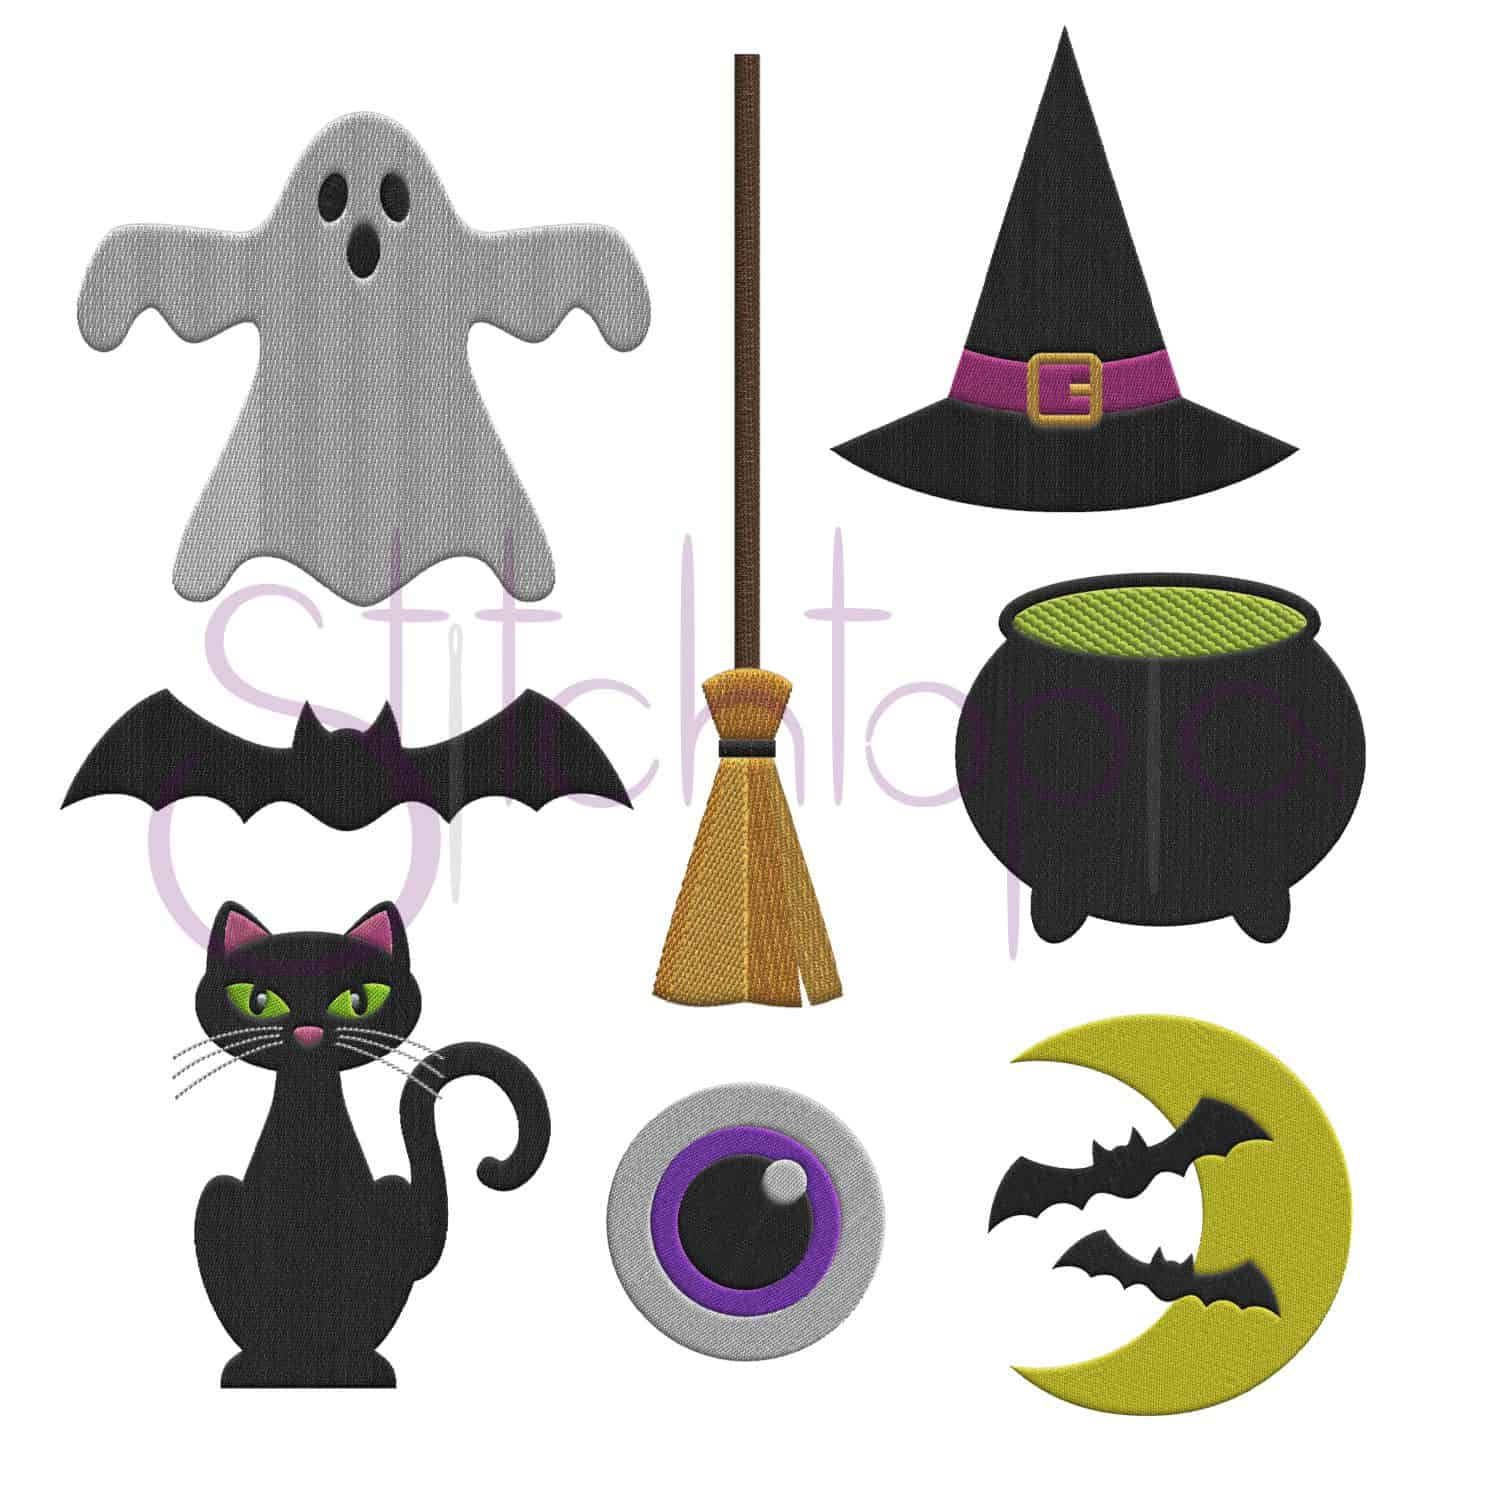 Halloween Embroidery Patterns Halloween Embroidery Design Set